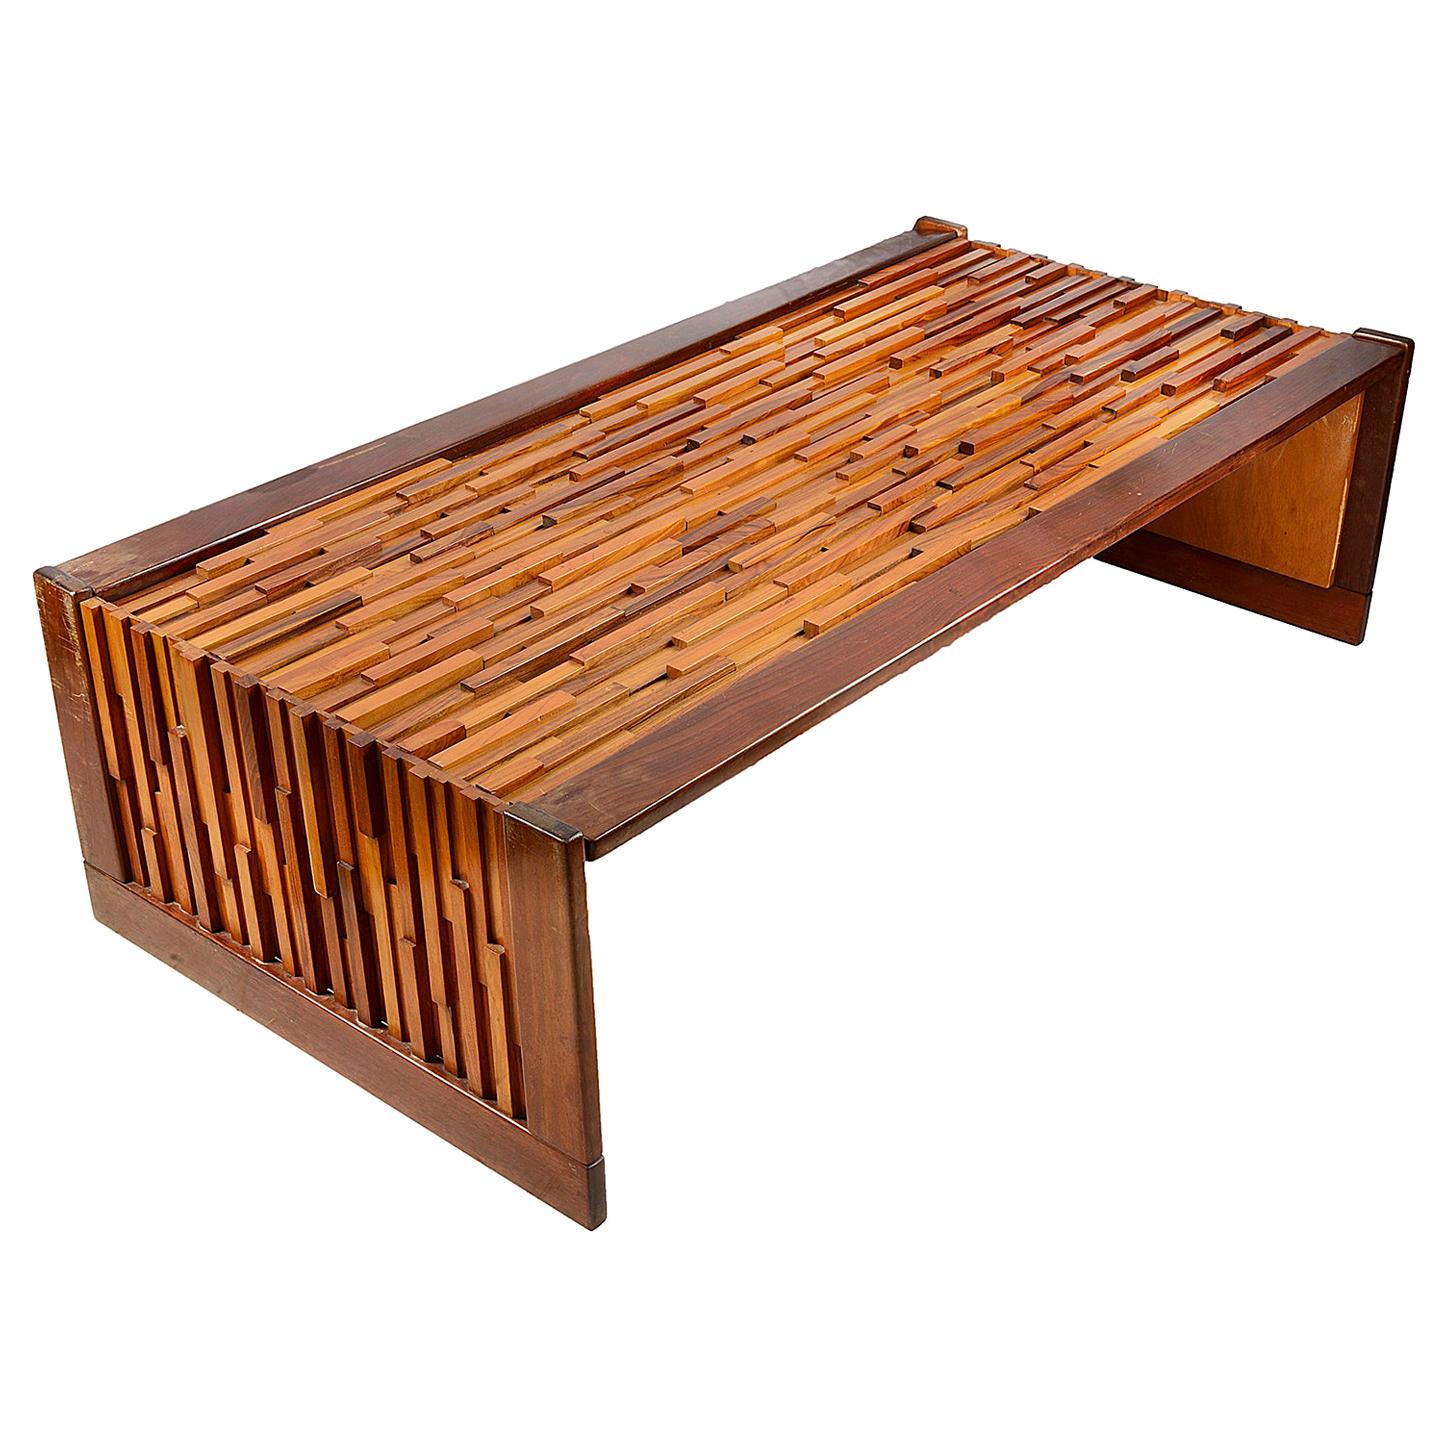 Percival Lafer Mid-Century Modern Brutalist Style Coffee Table